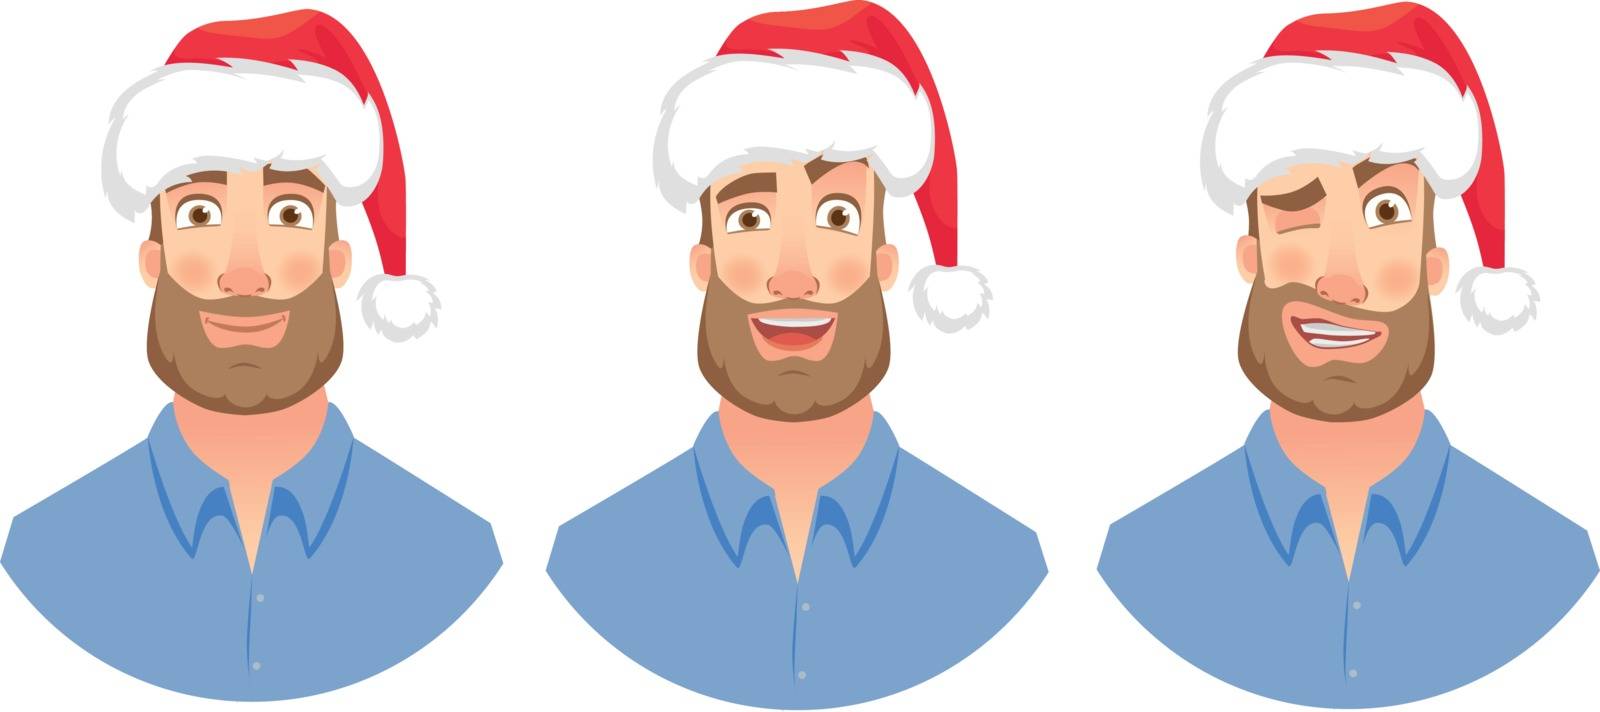 Businessman in Santa Claus hat. Man emotions set. Face of man with beard vector illustration